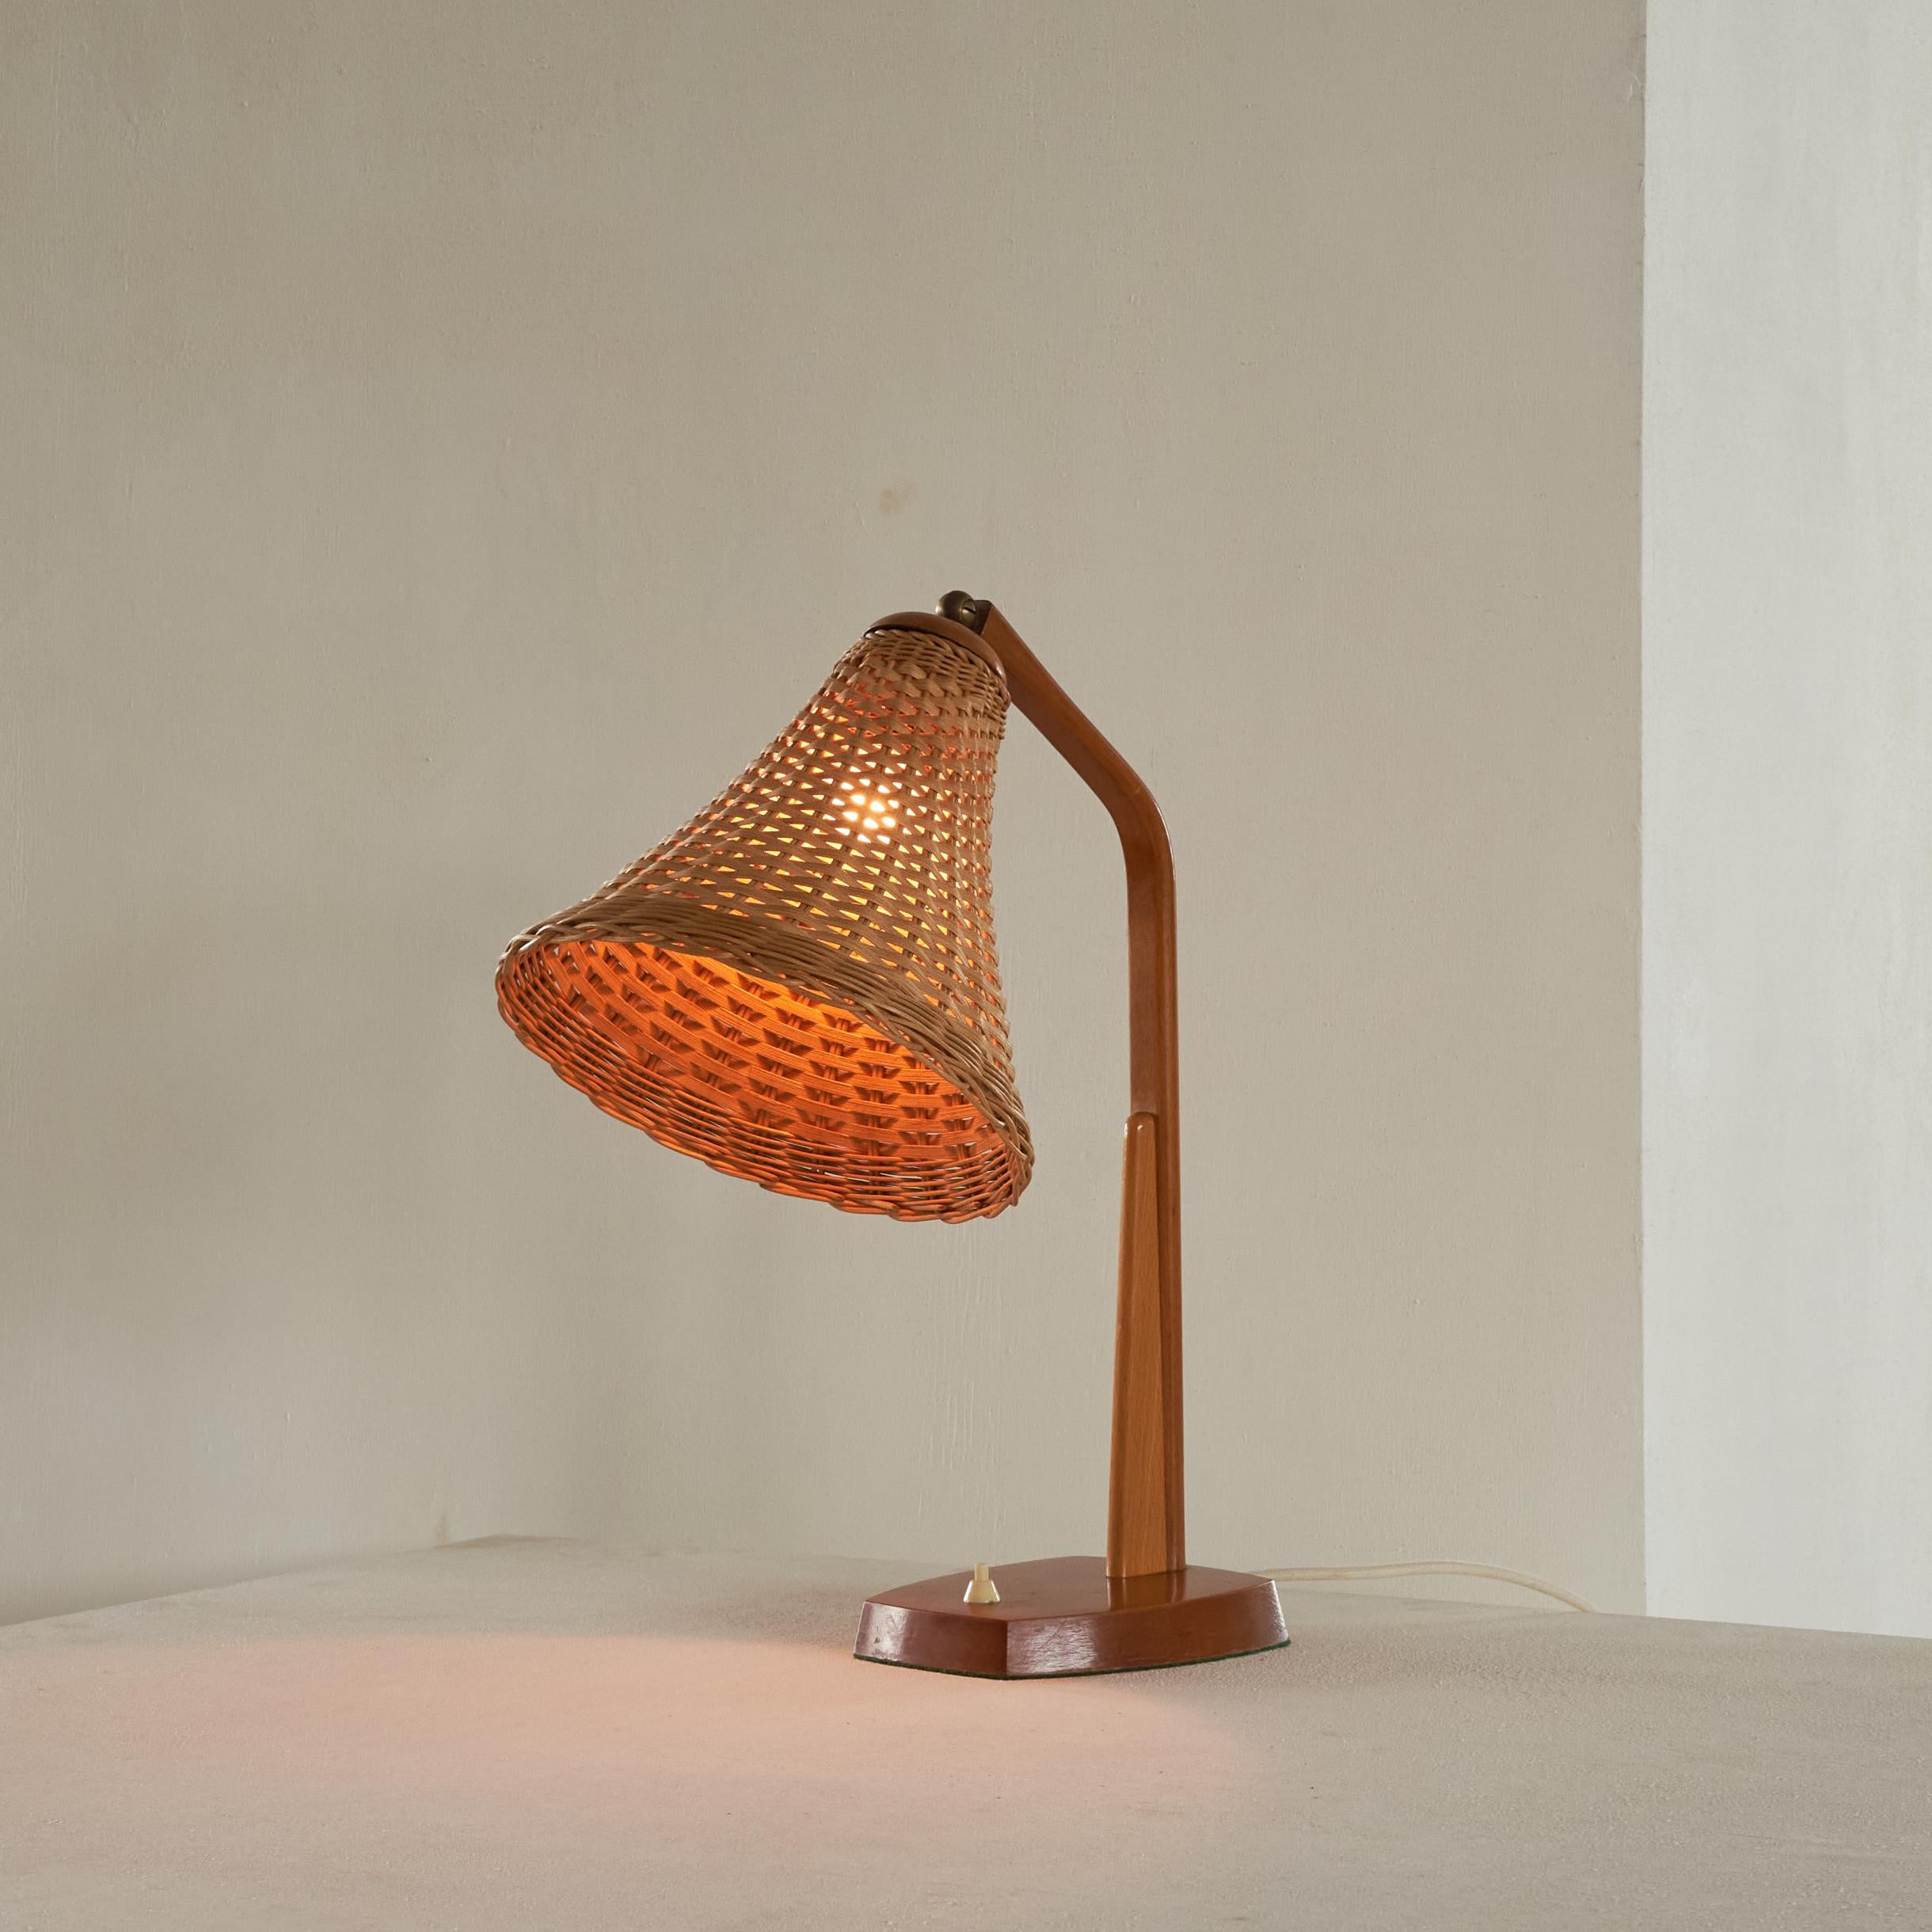 Brass Mid Century Desk Lamp in Rattan and Wood 1960s